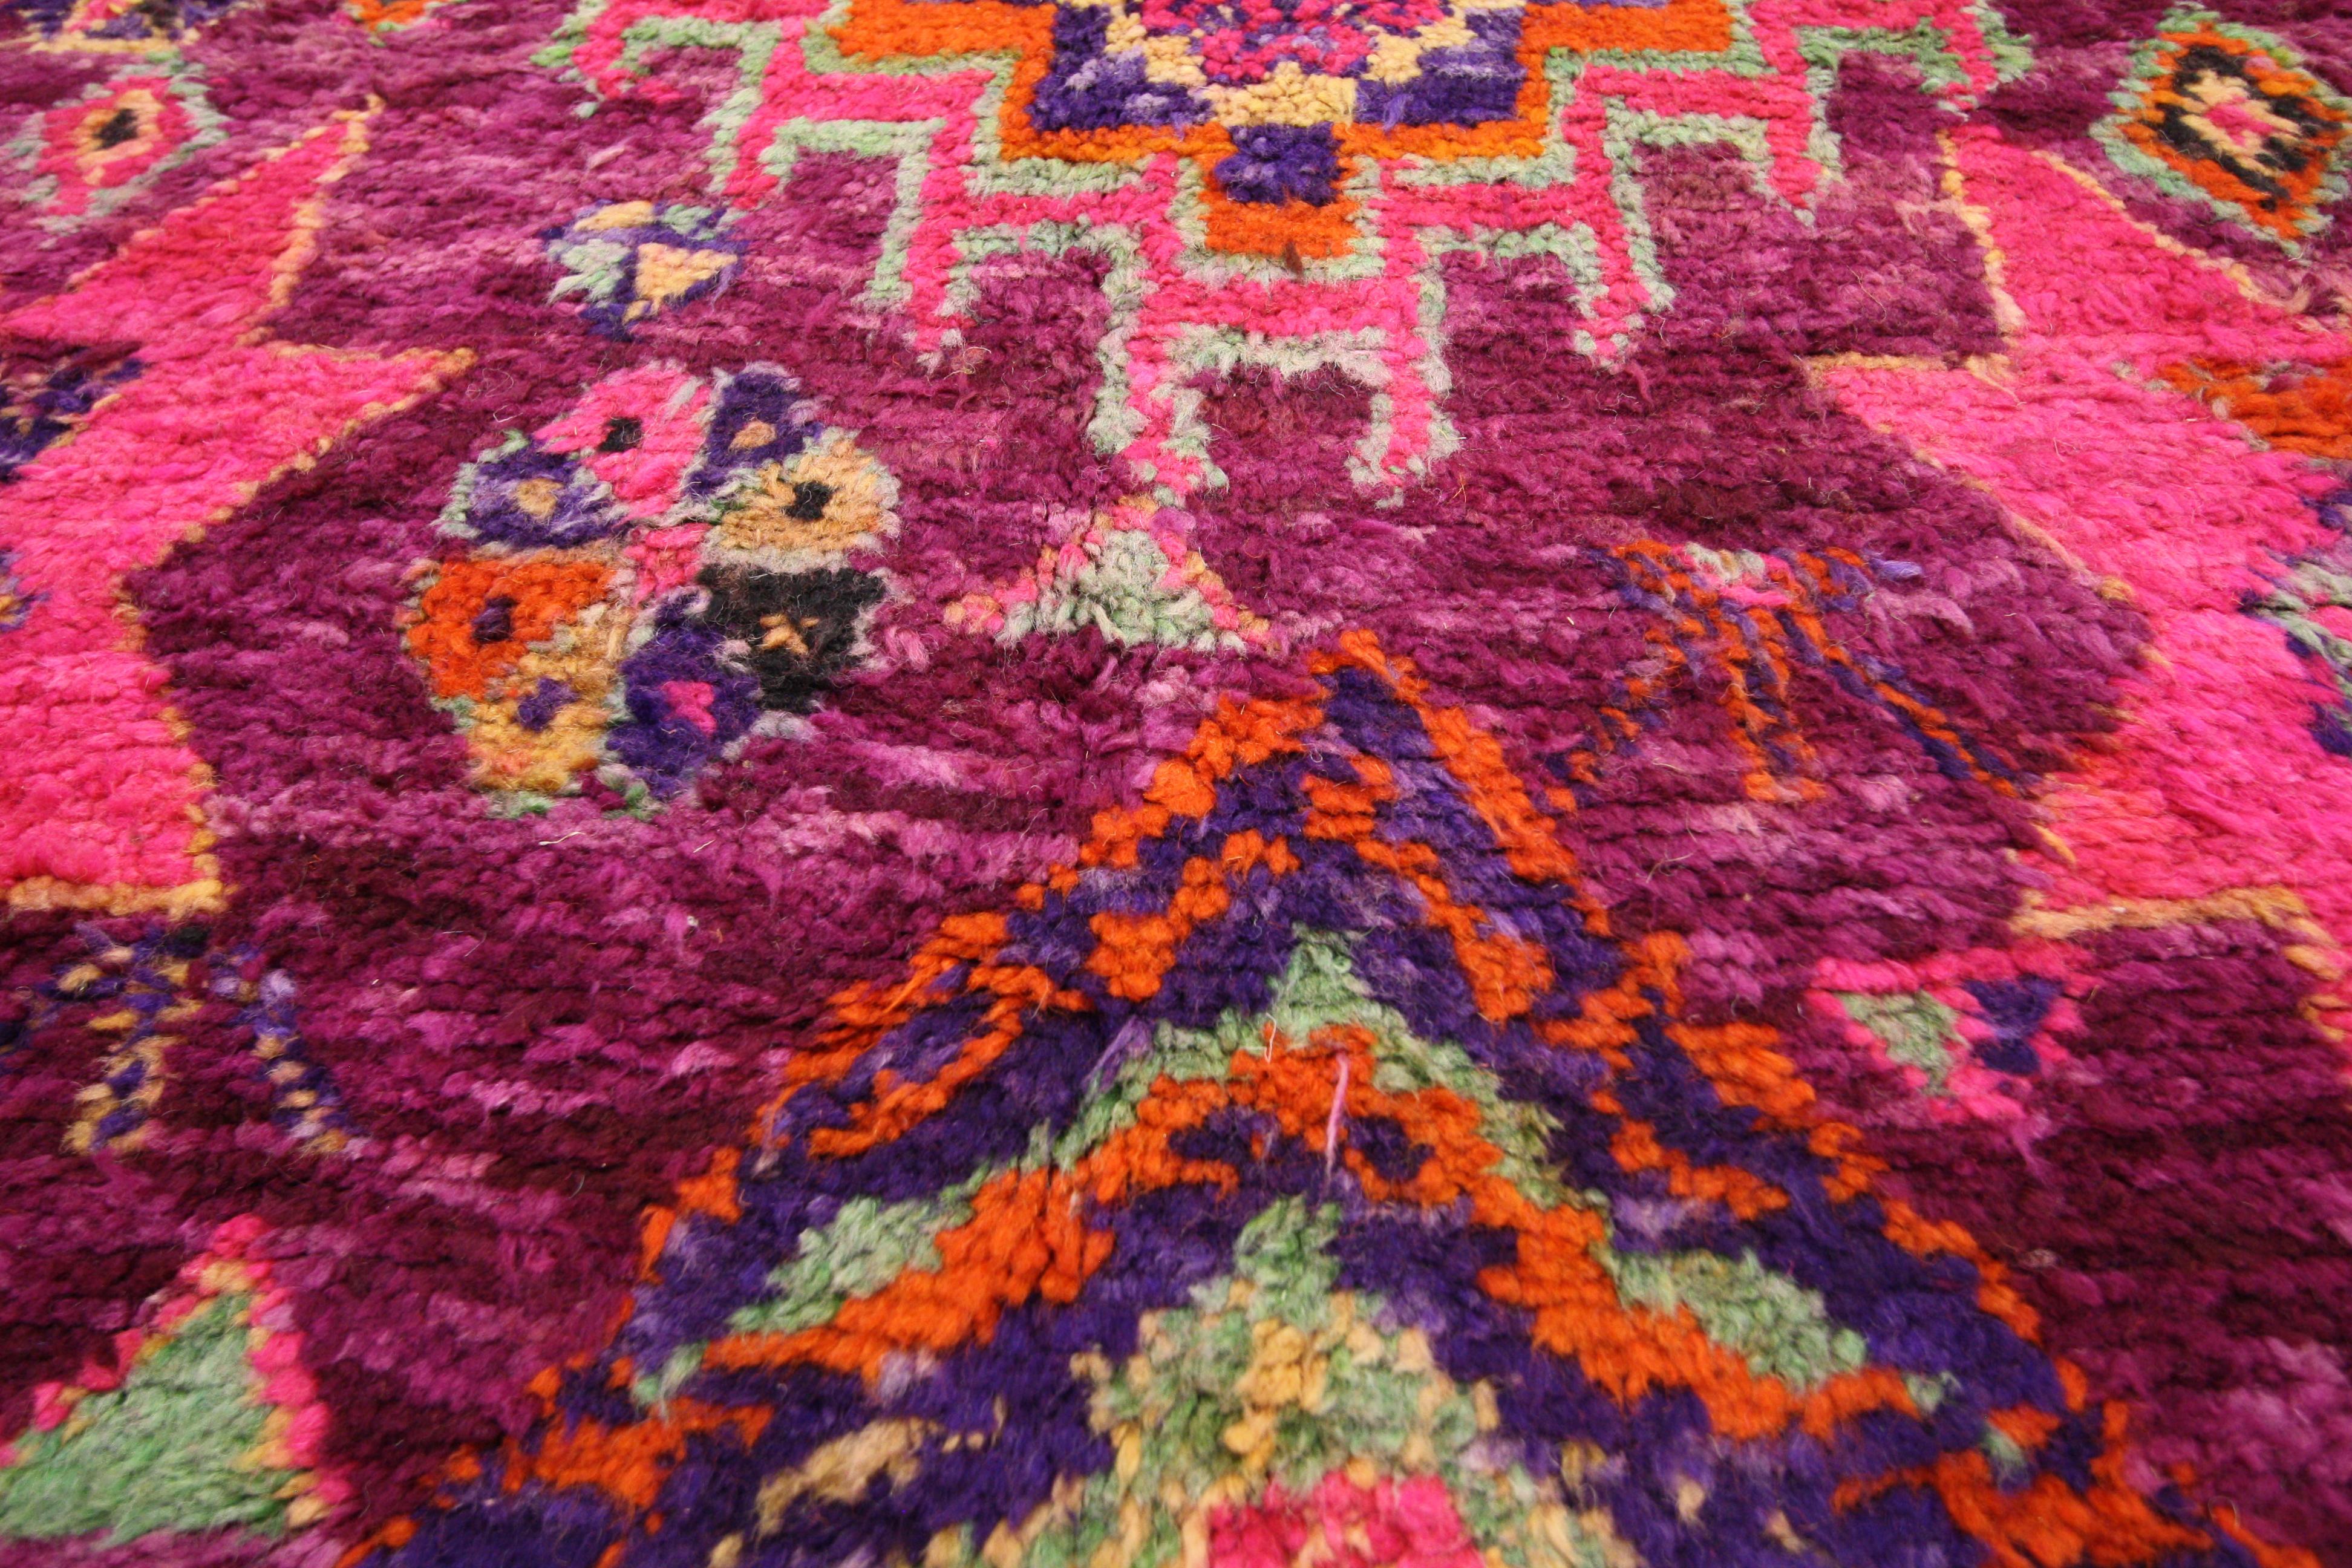 20700, vintage Berber Moroccan rug with tribal style, Moroccan Berber carpet. This hand-knotted wool vintage Berber Moroccan rug evokes imagery of power and majesty. Animated with Berber tribe motifs and secondary protection symbols, from diamonds